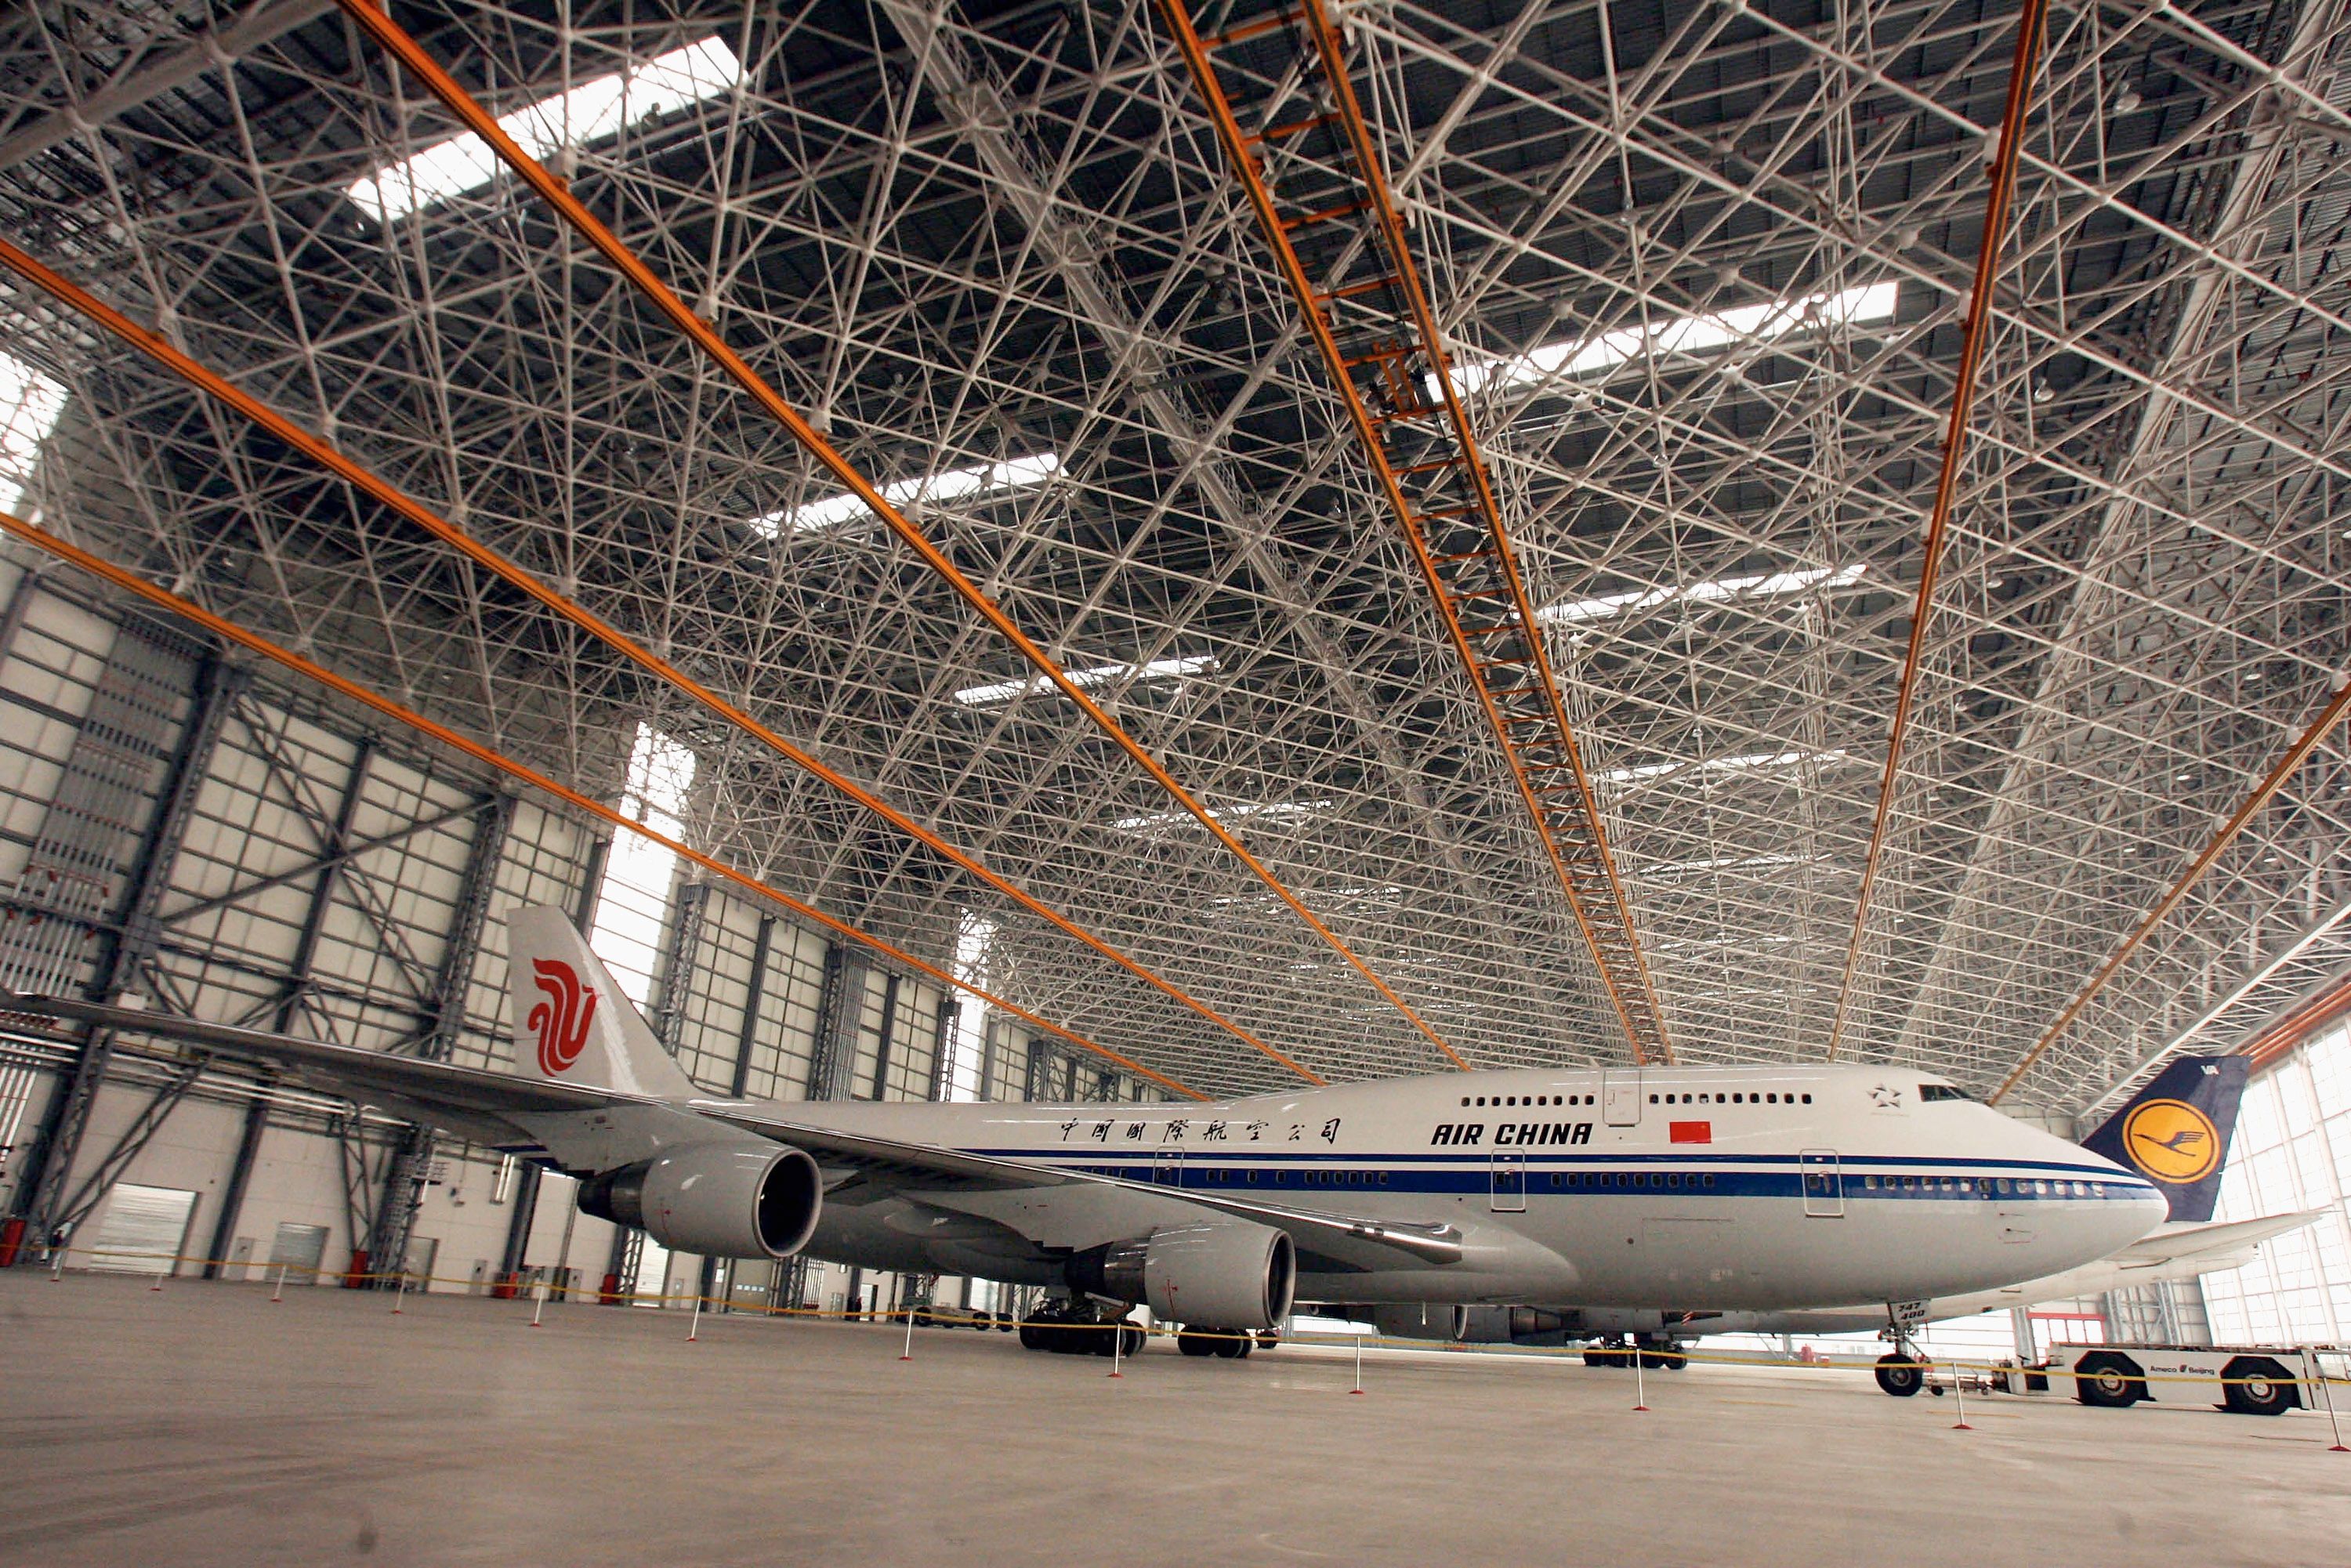 AC Boeing 747-8 and LH Airbus A380 at a new hanger in China